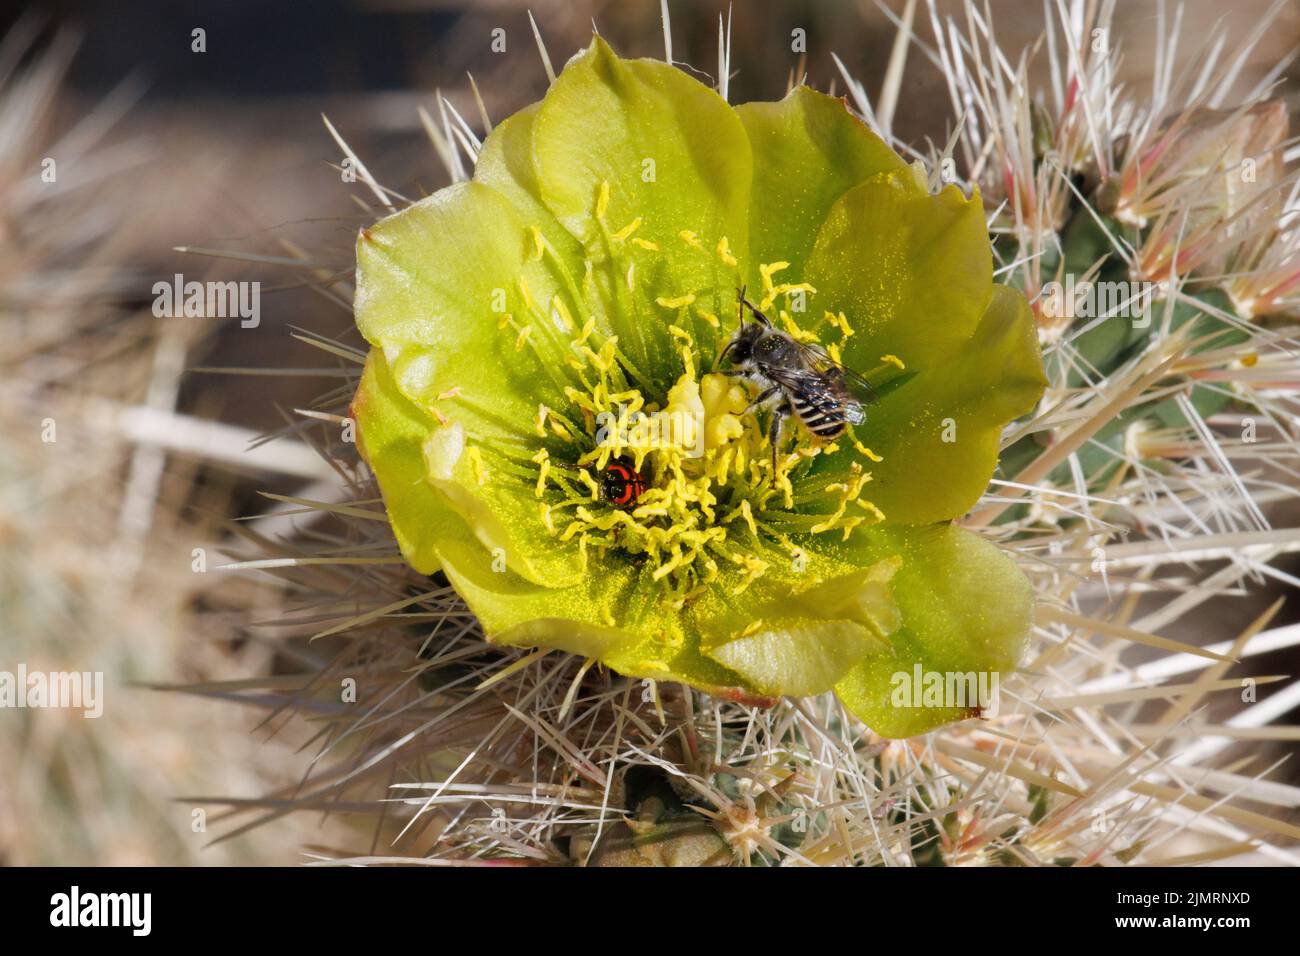 Green flowering determinate solitary inflorescence of Cylindropuntia Echinocarpa, Cactaceae, native shrub in the Anza Borrego Desert, Springtime. Stock Photo